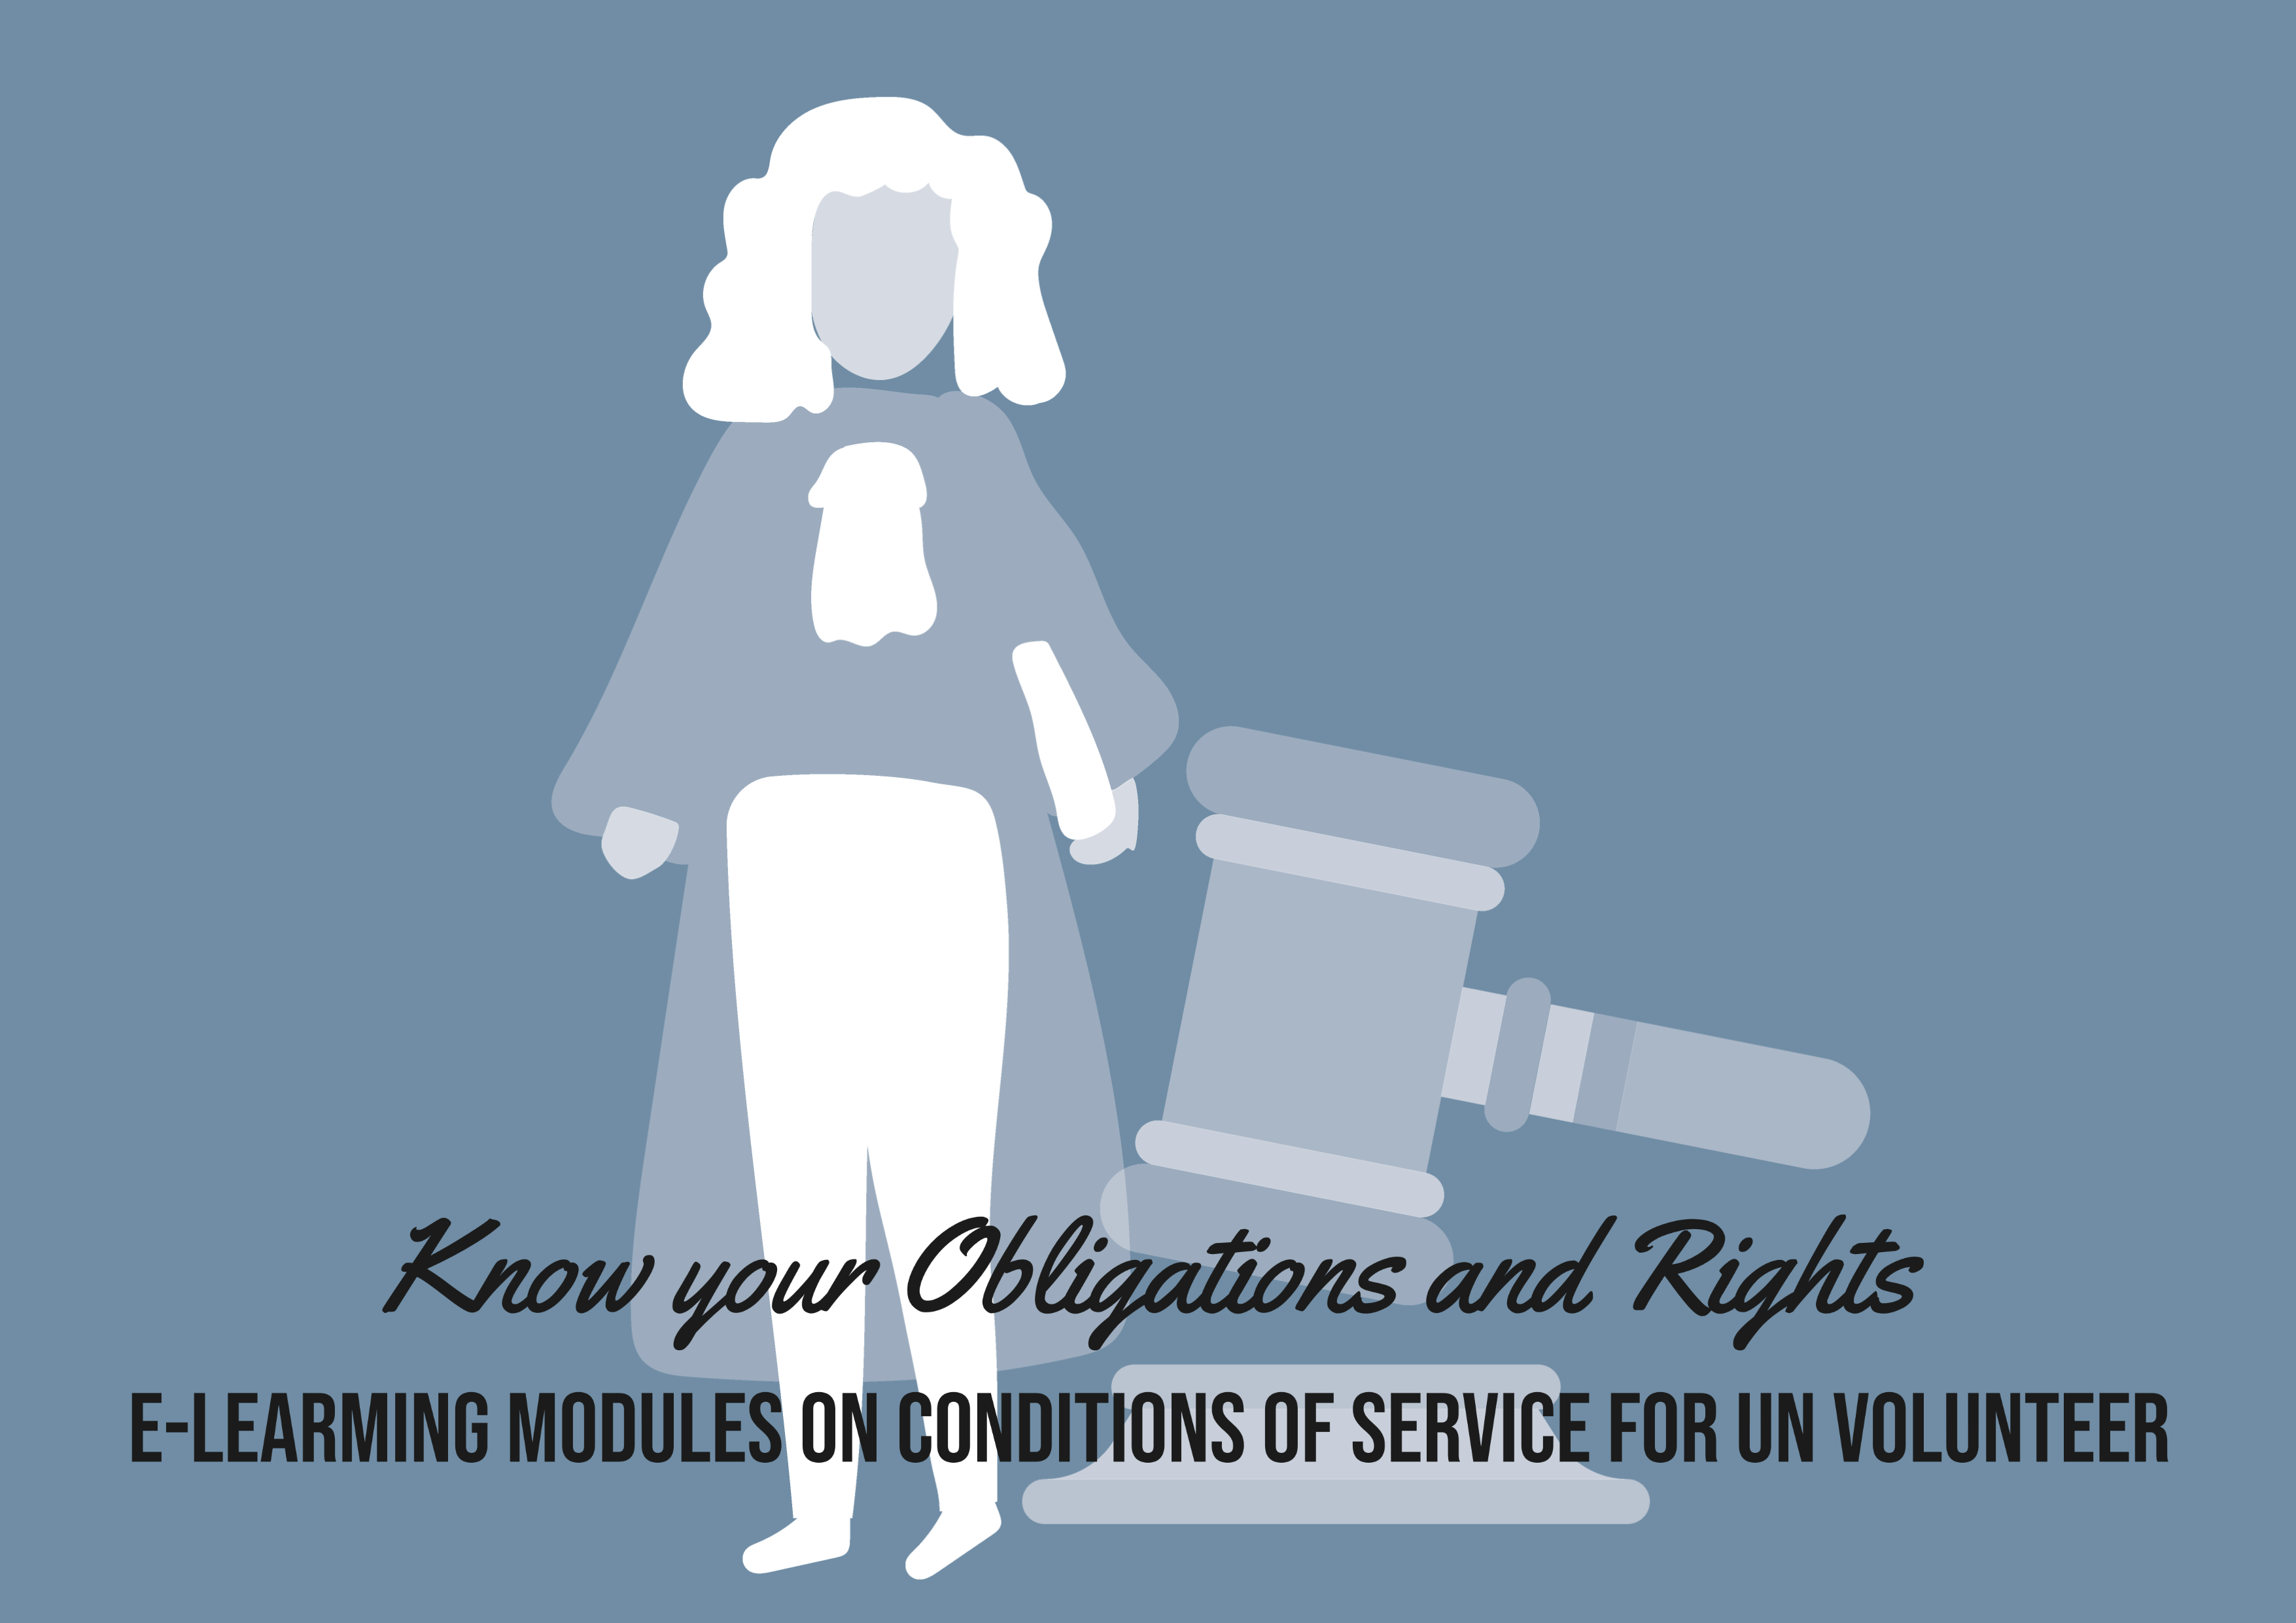 Know your Obligations and Rights as a UN Volunteer course